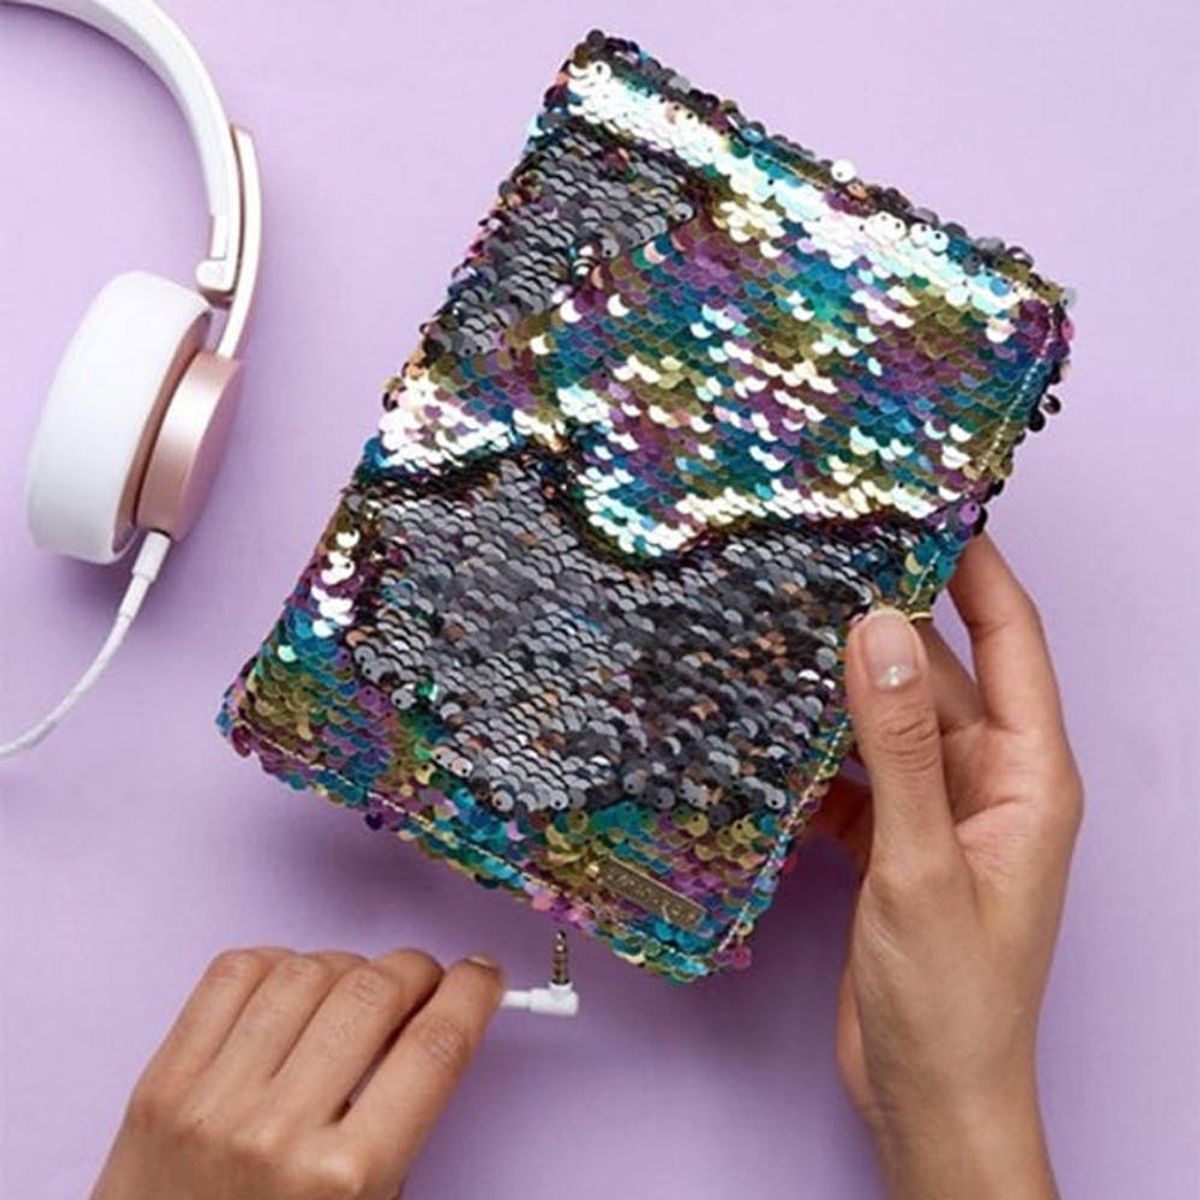 15 Gifts for Anyone Who Can’t Get Enough Glitter